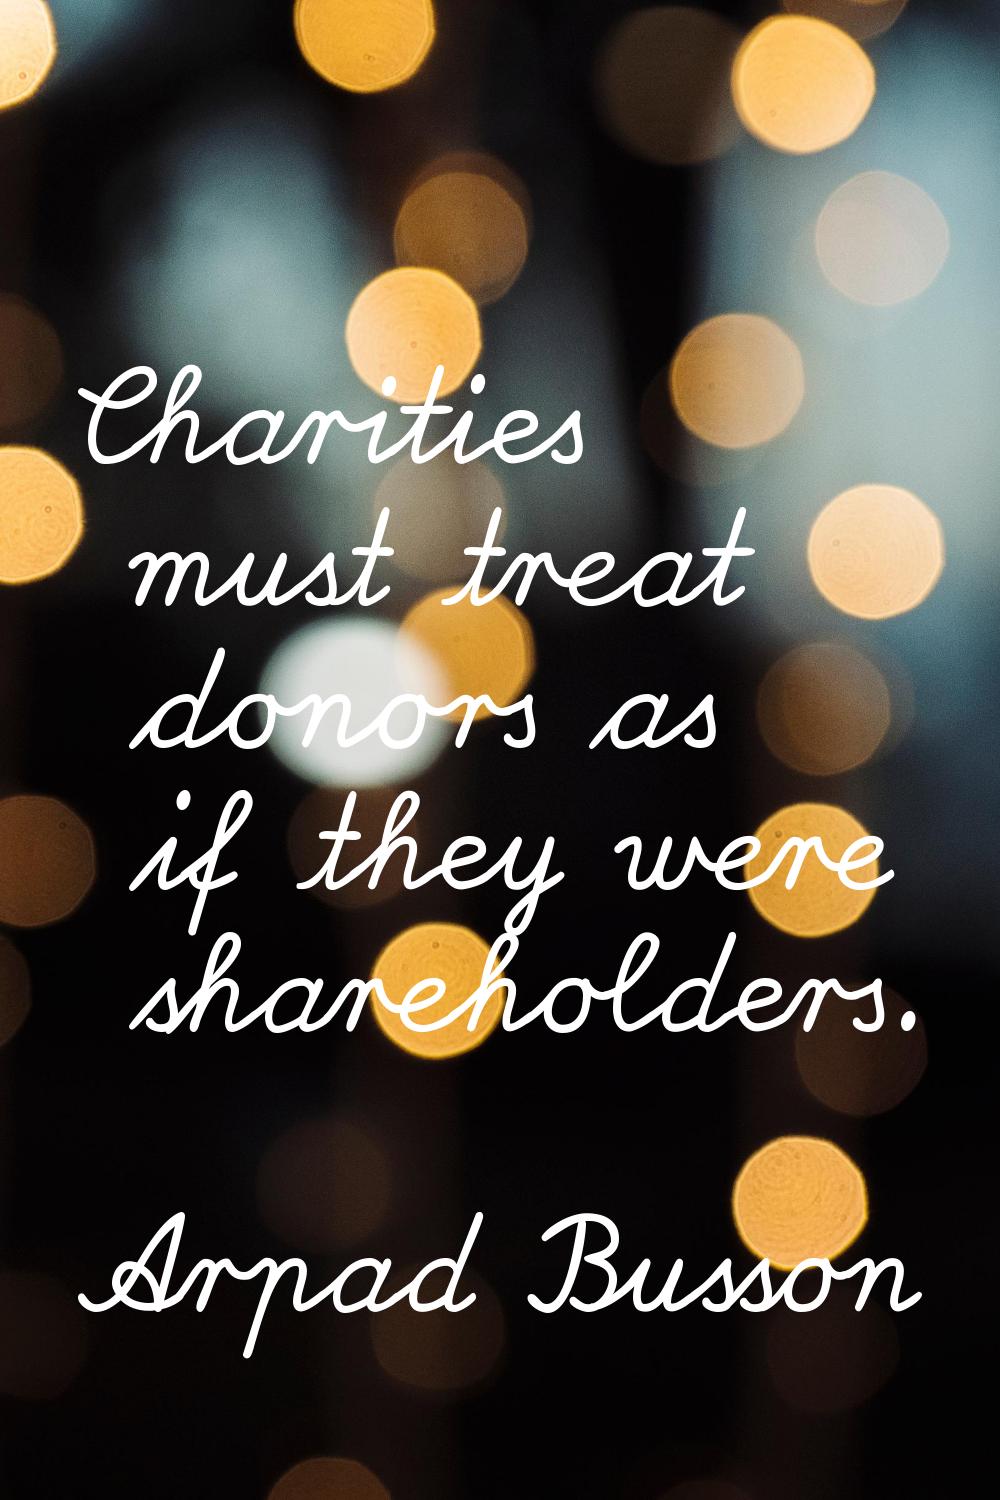 Charities must treat donors as if they were shareholders.